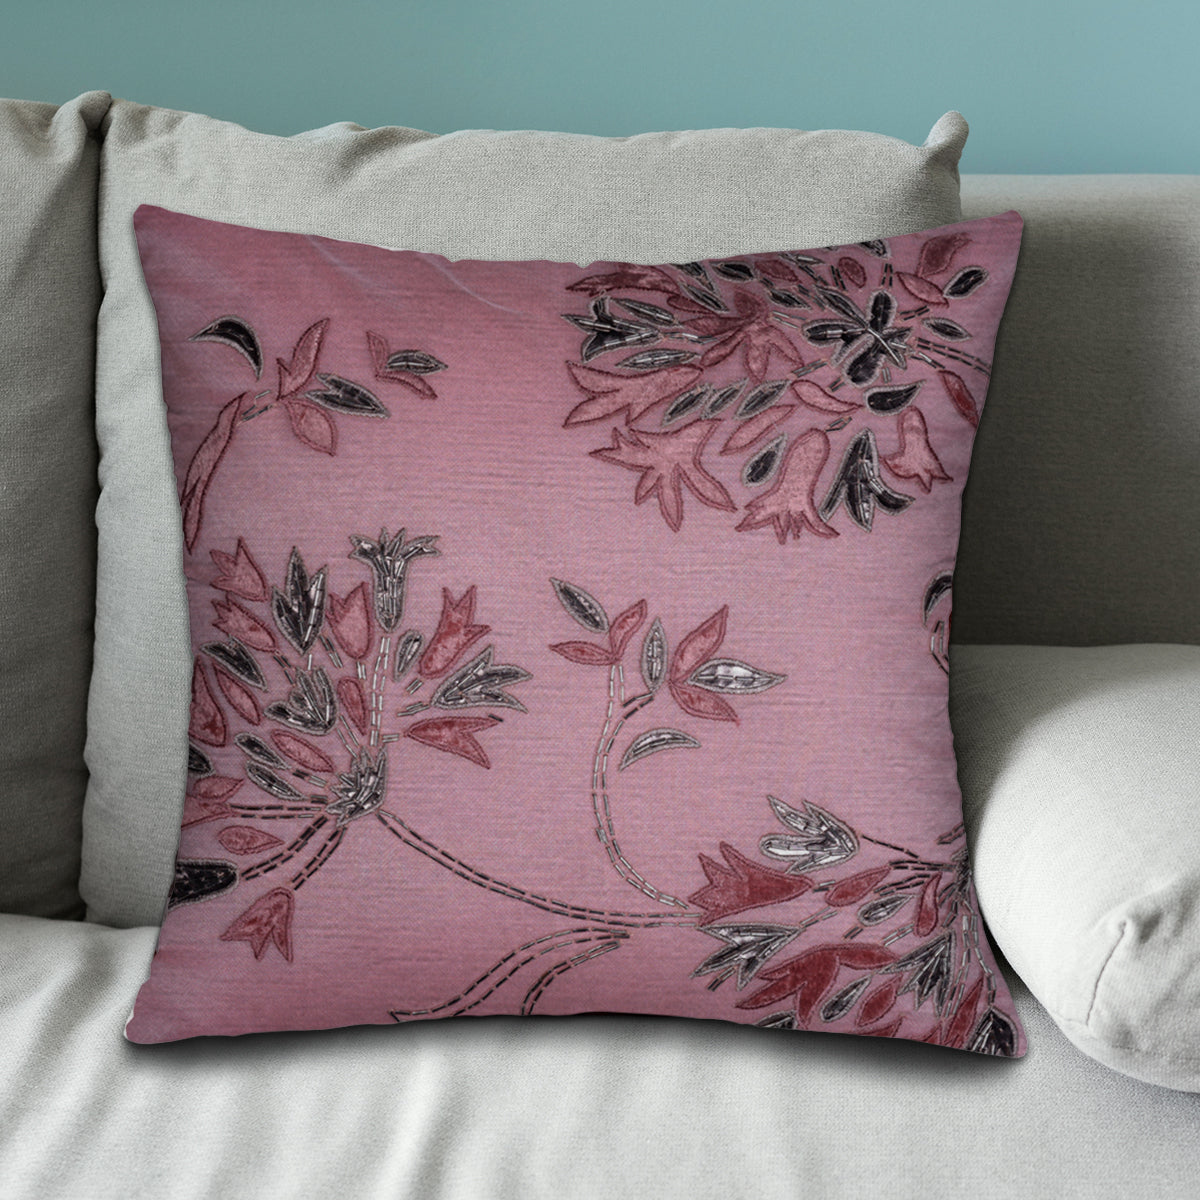 Pink Throw Pillow Covers - Set of 2 and 4, 18 x 18 inches - Decozen